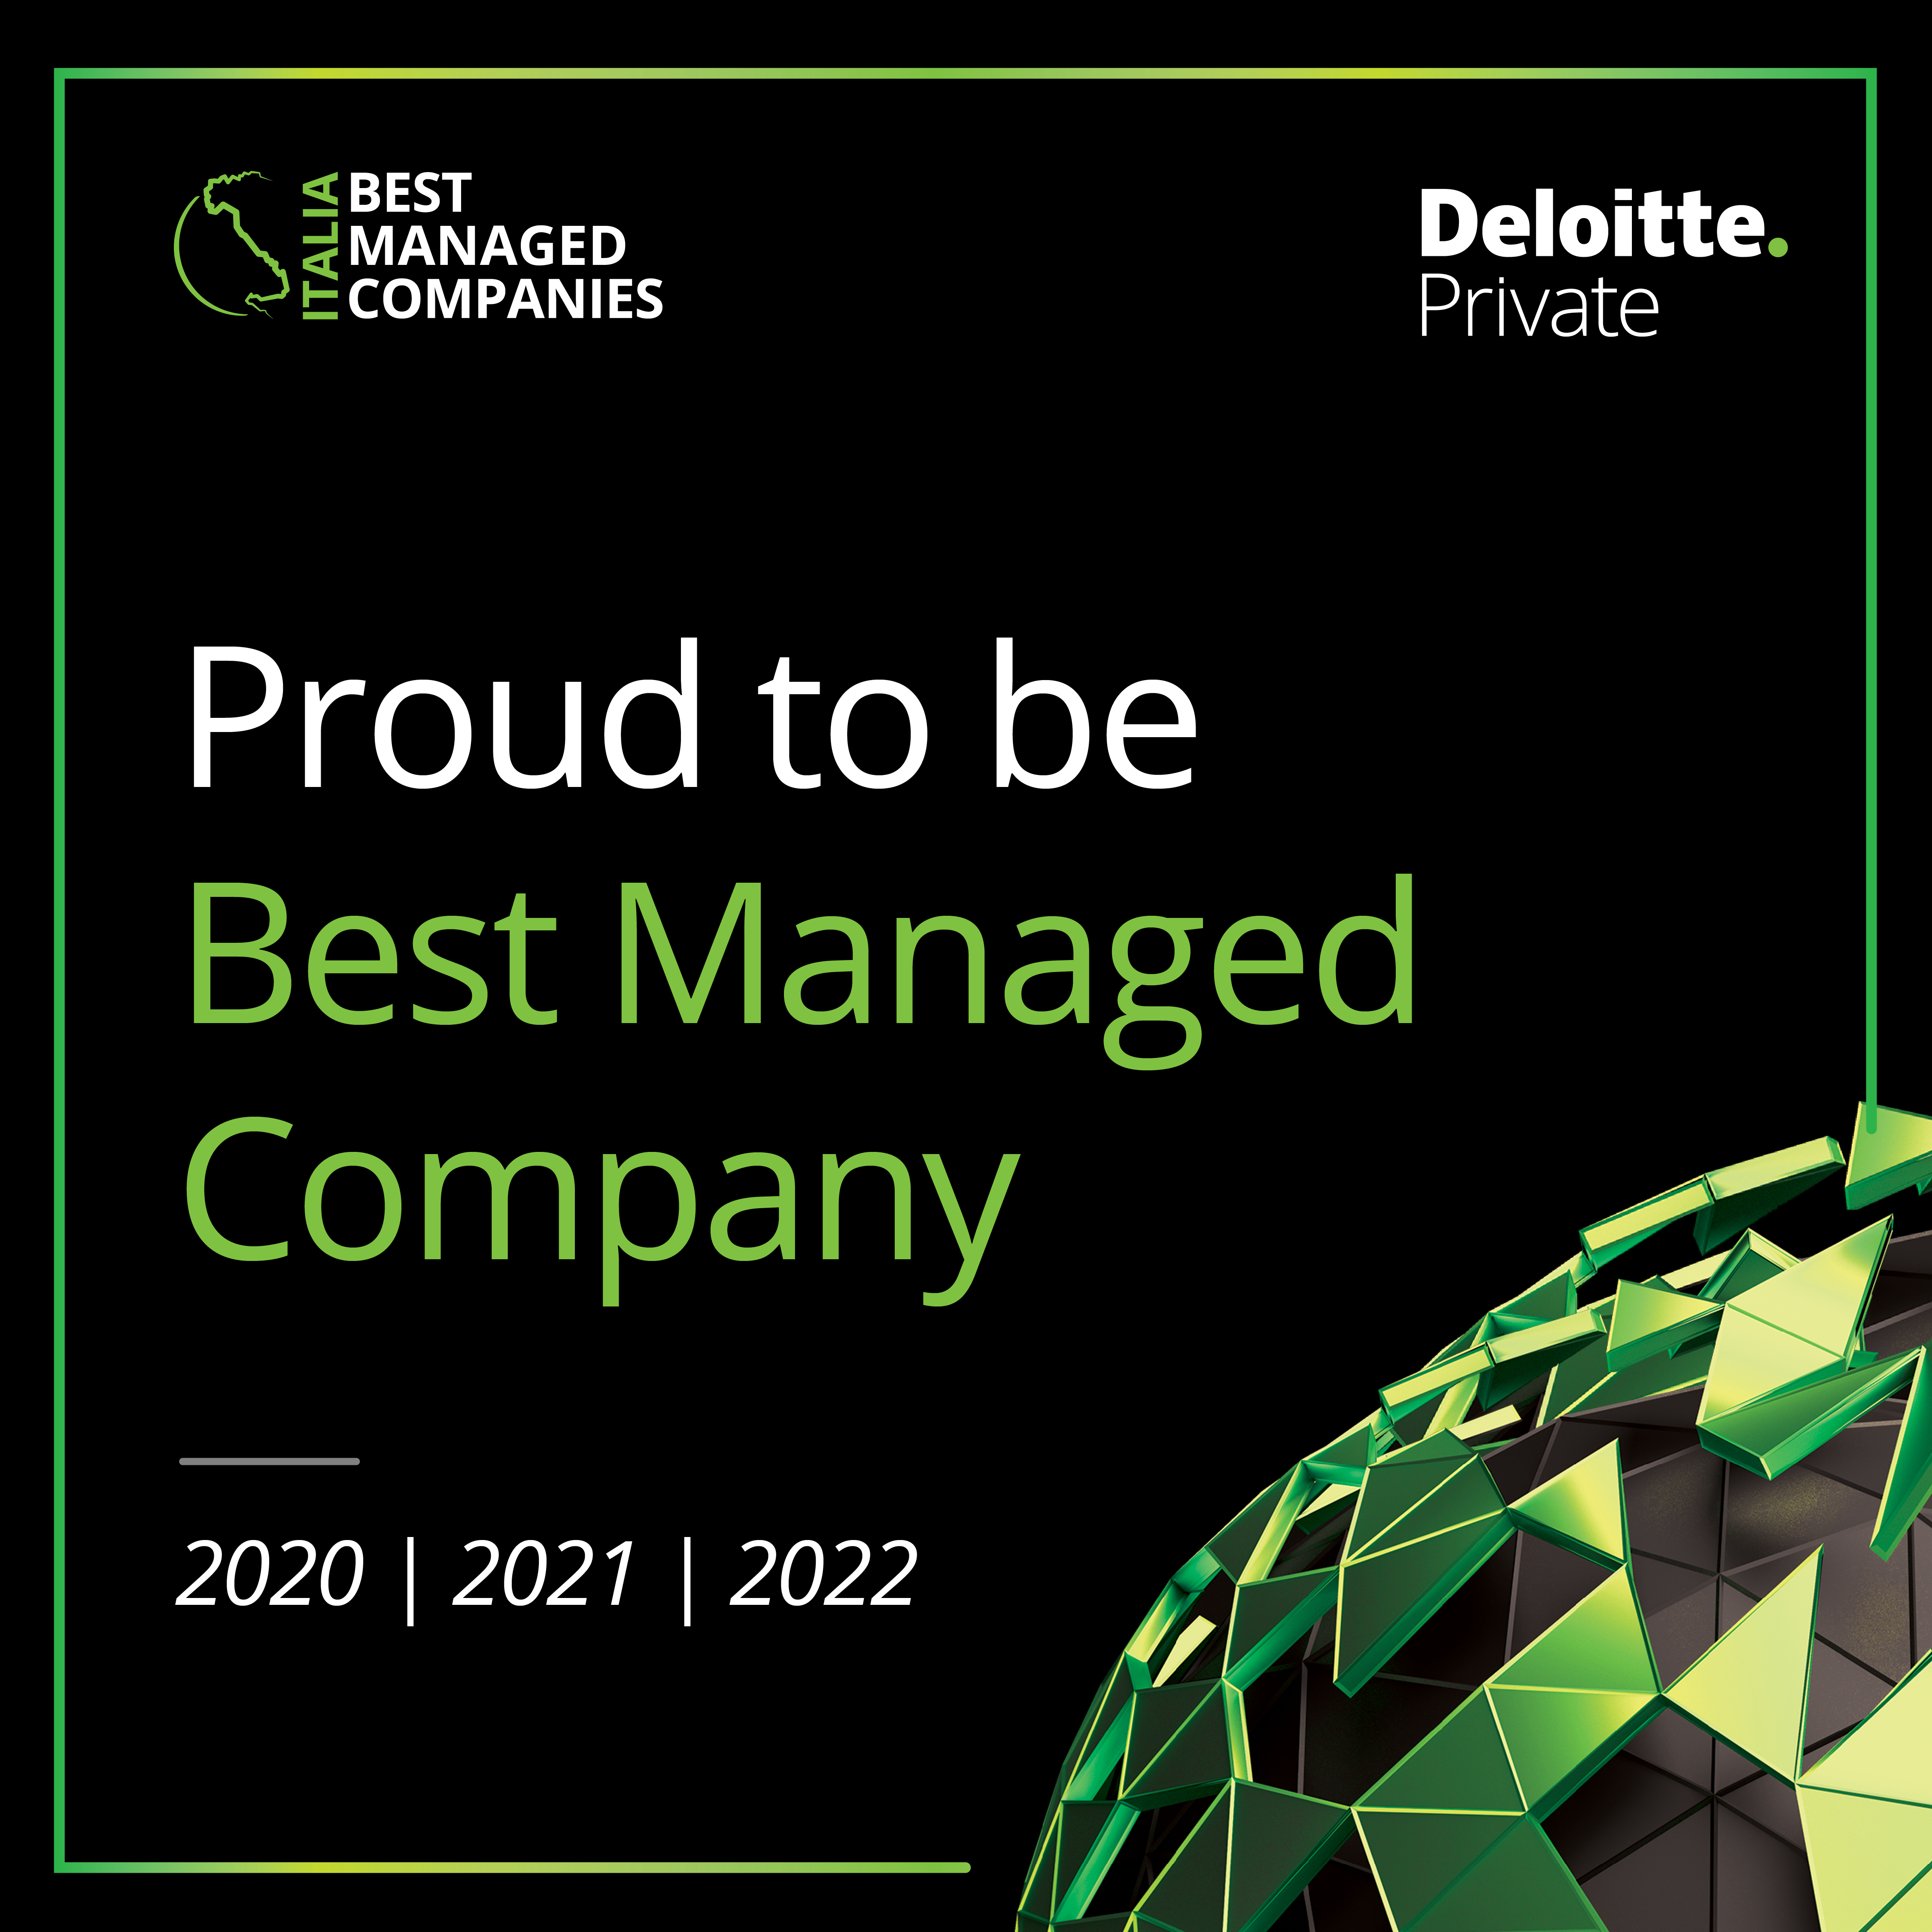 “BEST MANAGED COMPANIES” AWARD DELOITTE PRIVATE 2022